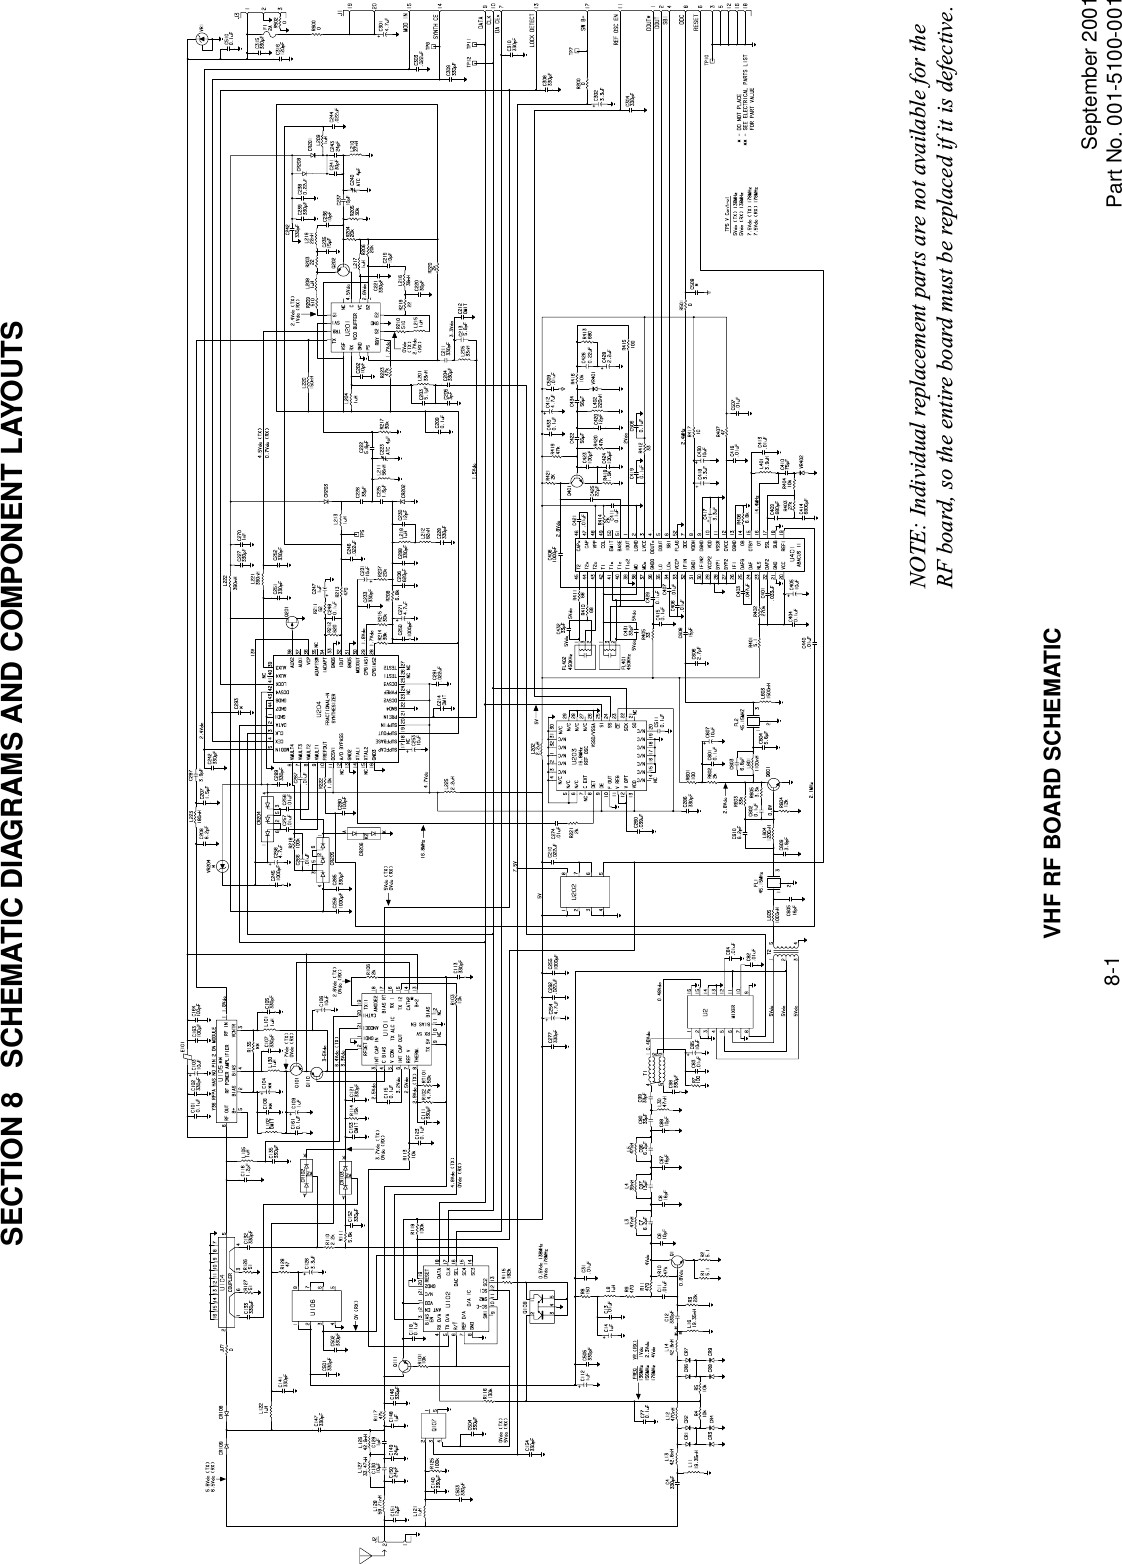 September 2001Part No. 001-5100-0018-1VHF RF BOARD SCHEMATICNOTE: Individual replacement parts are not available for the RF board, so the entire board must be replaced if it is defective.SECTION 8   SCHEMATIC DIAGRAMS AND COMPONENT LAYOUTS